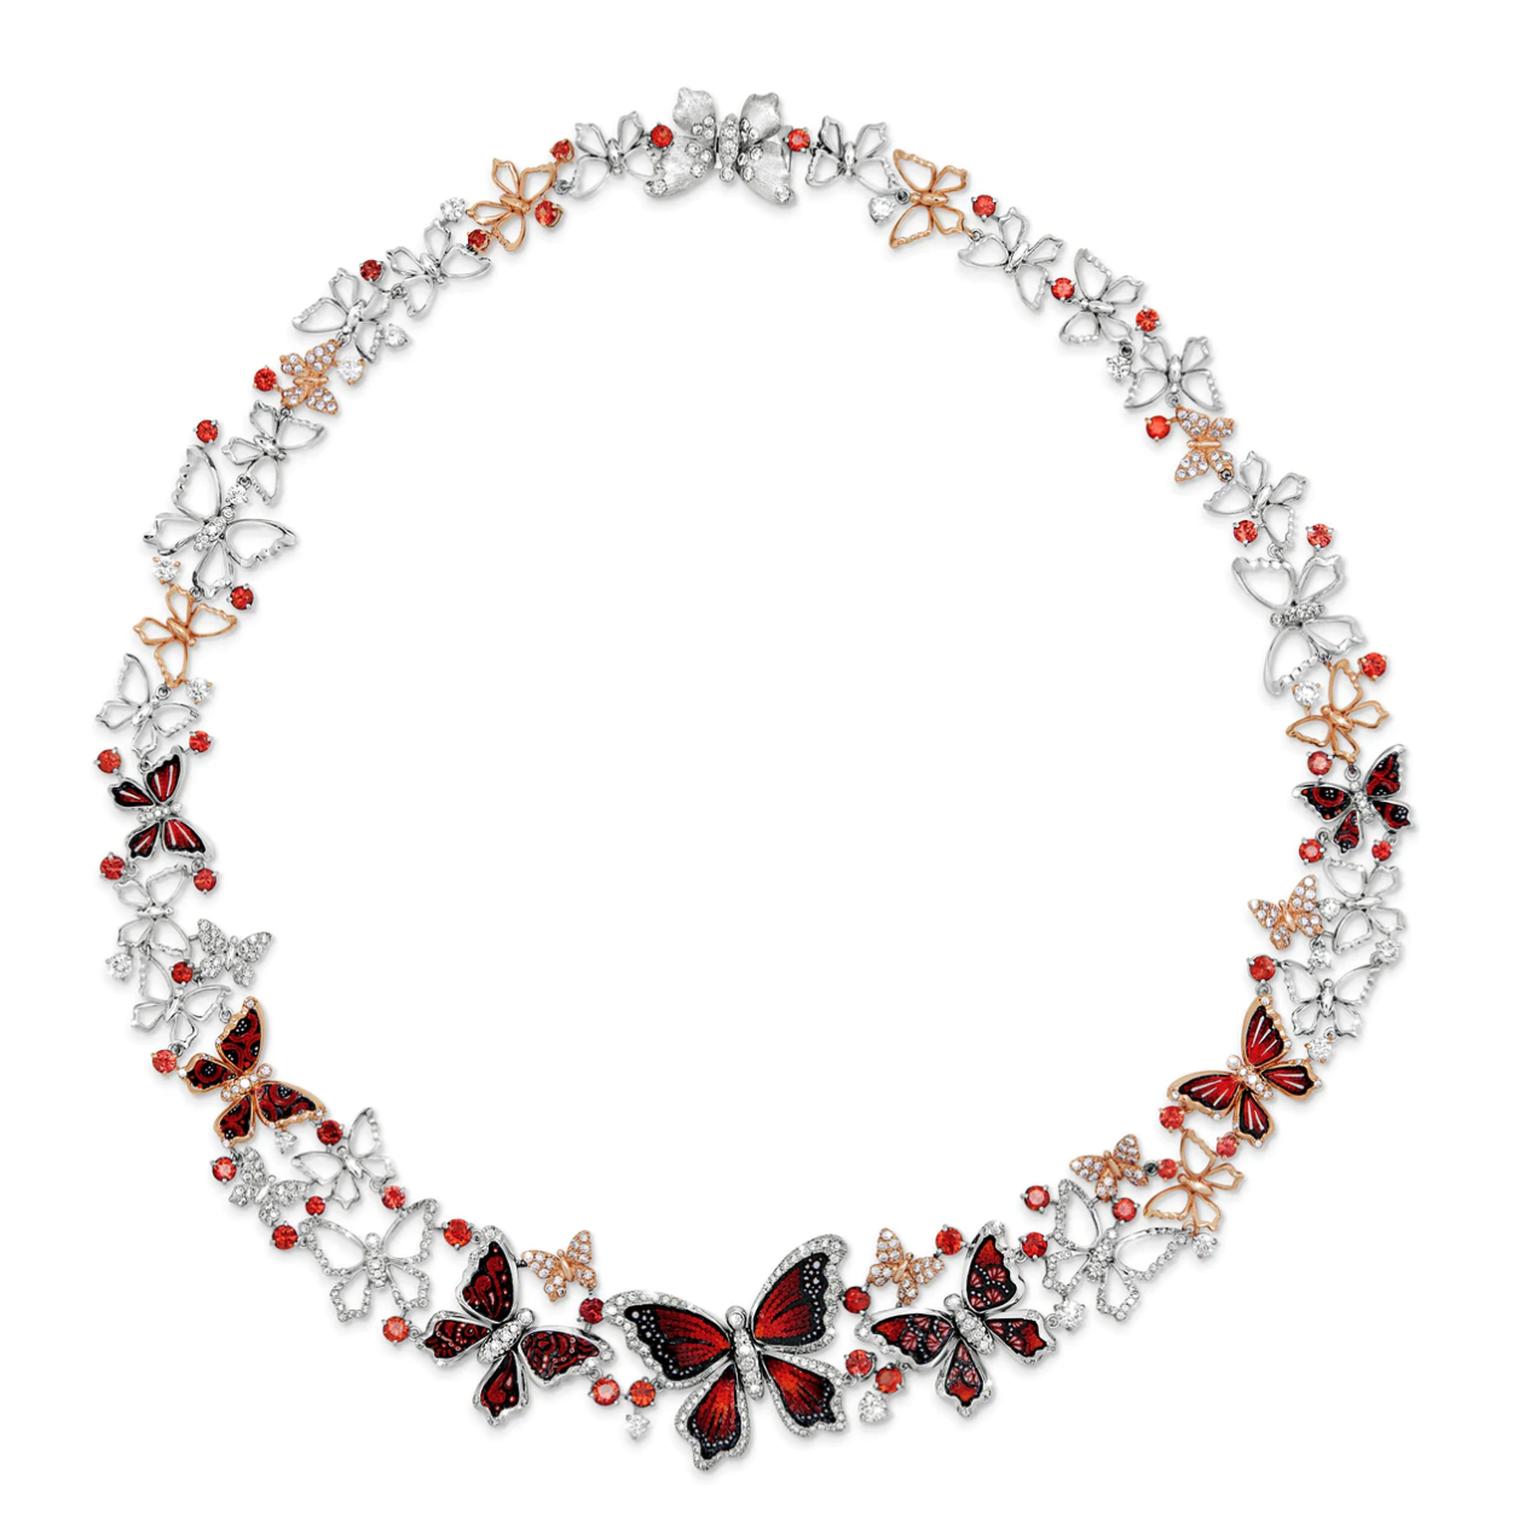 Butterfly Romance necklace by Sicis